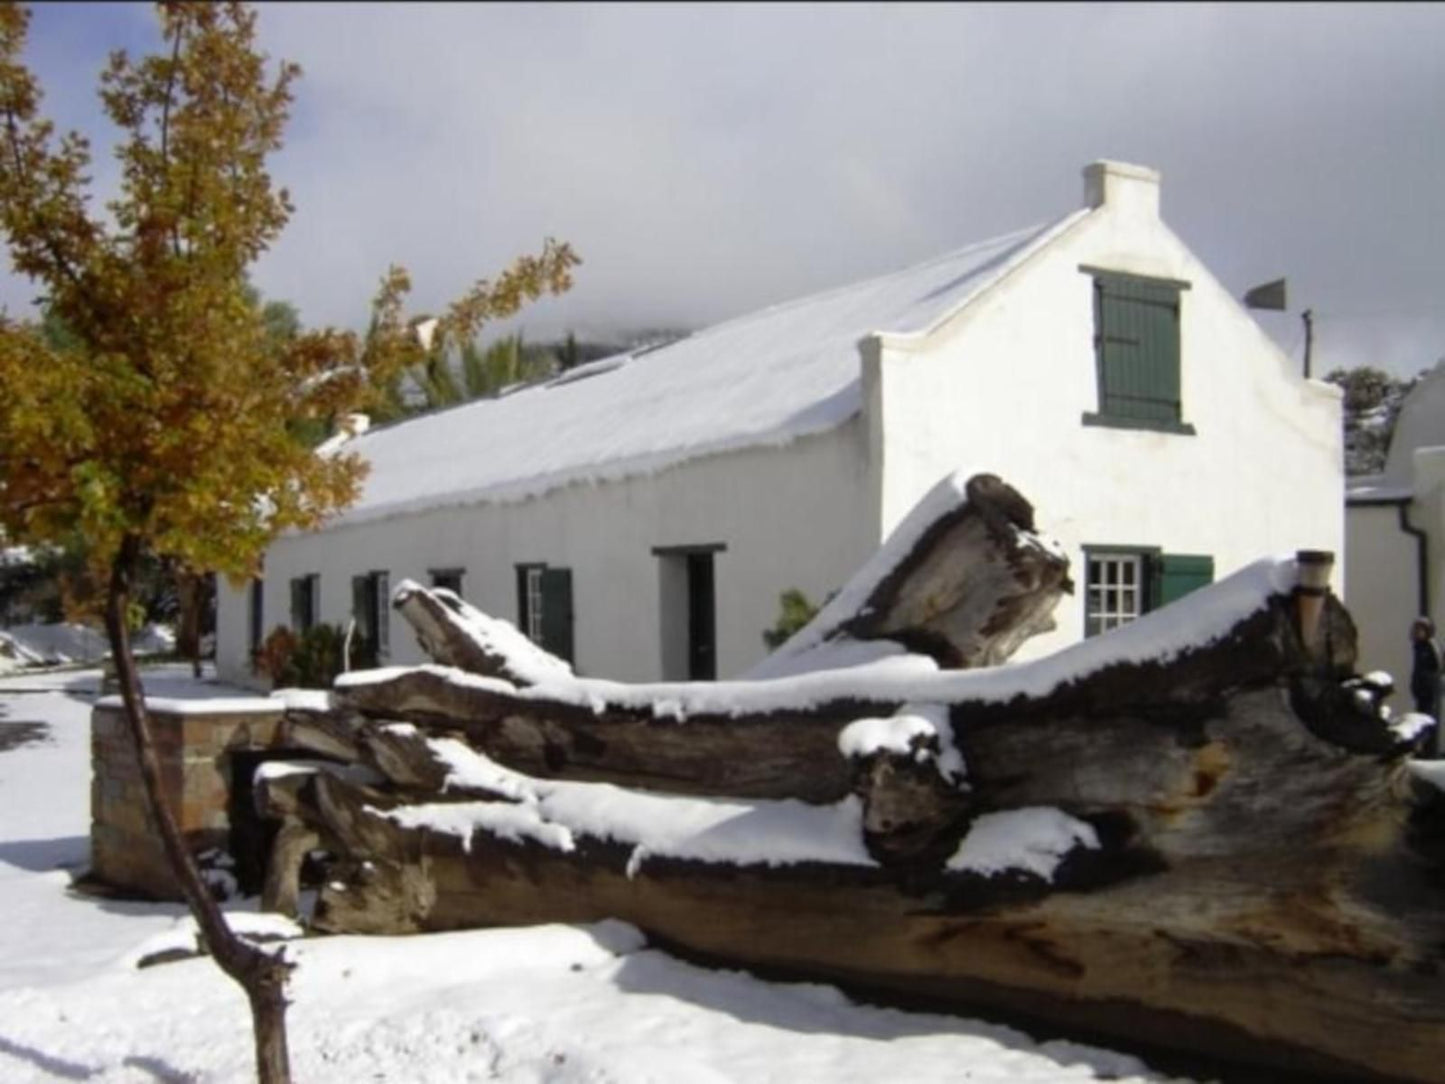 Letskraal Farm Accommodation Graaff Reinet Eastern Cape South Africa Window, Architecture, Nature, Snow, Winter